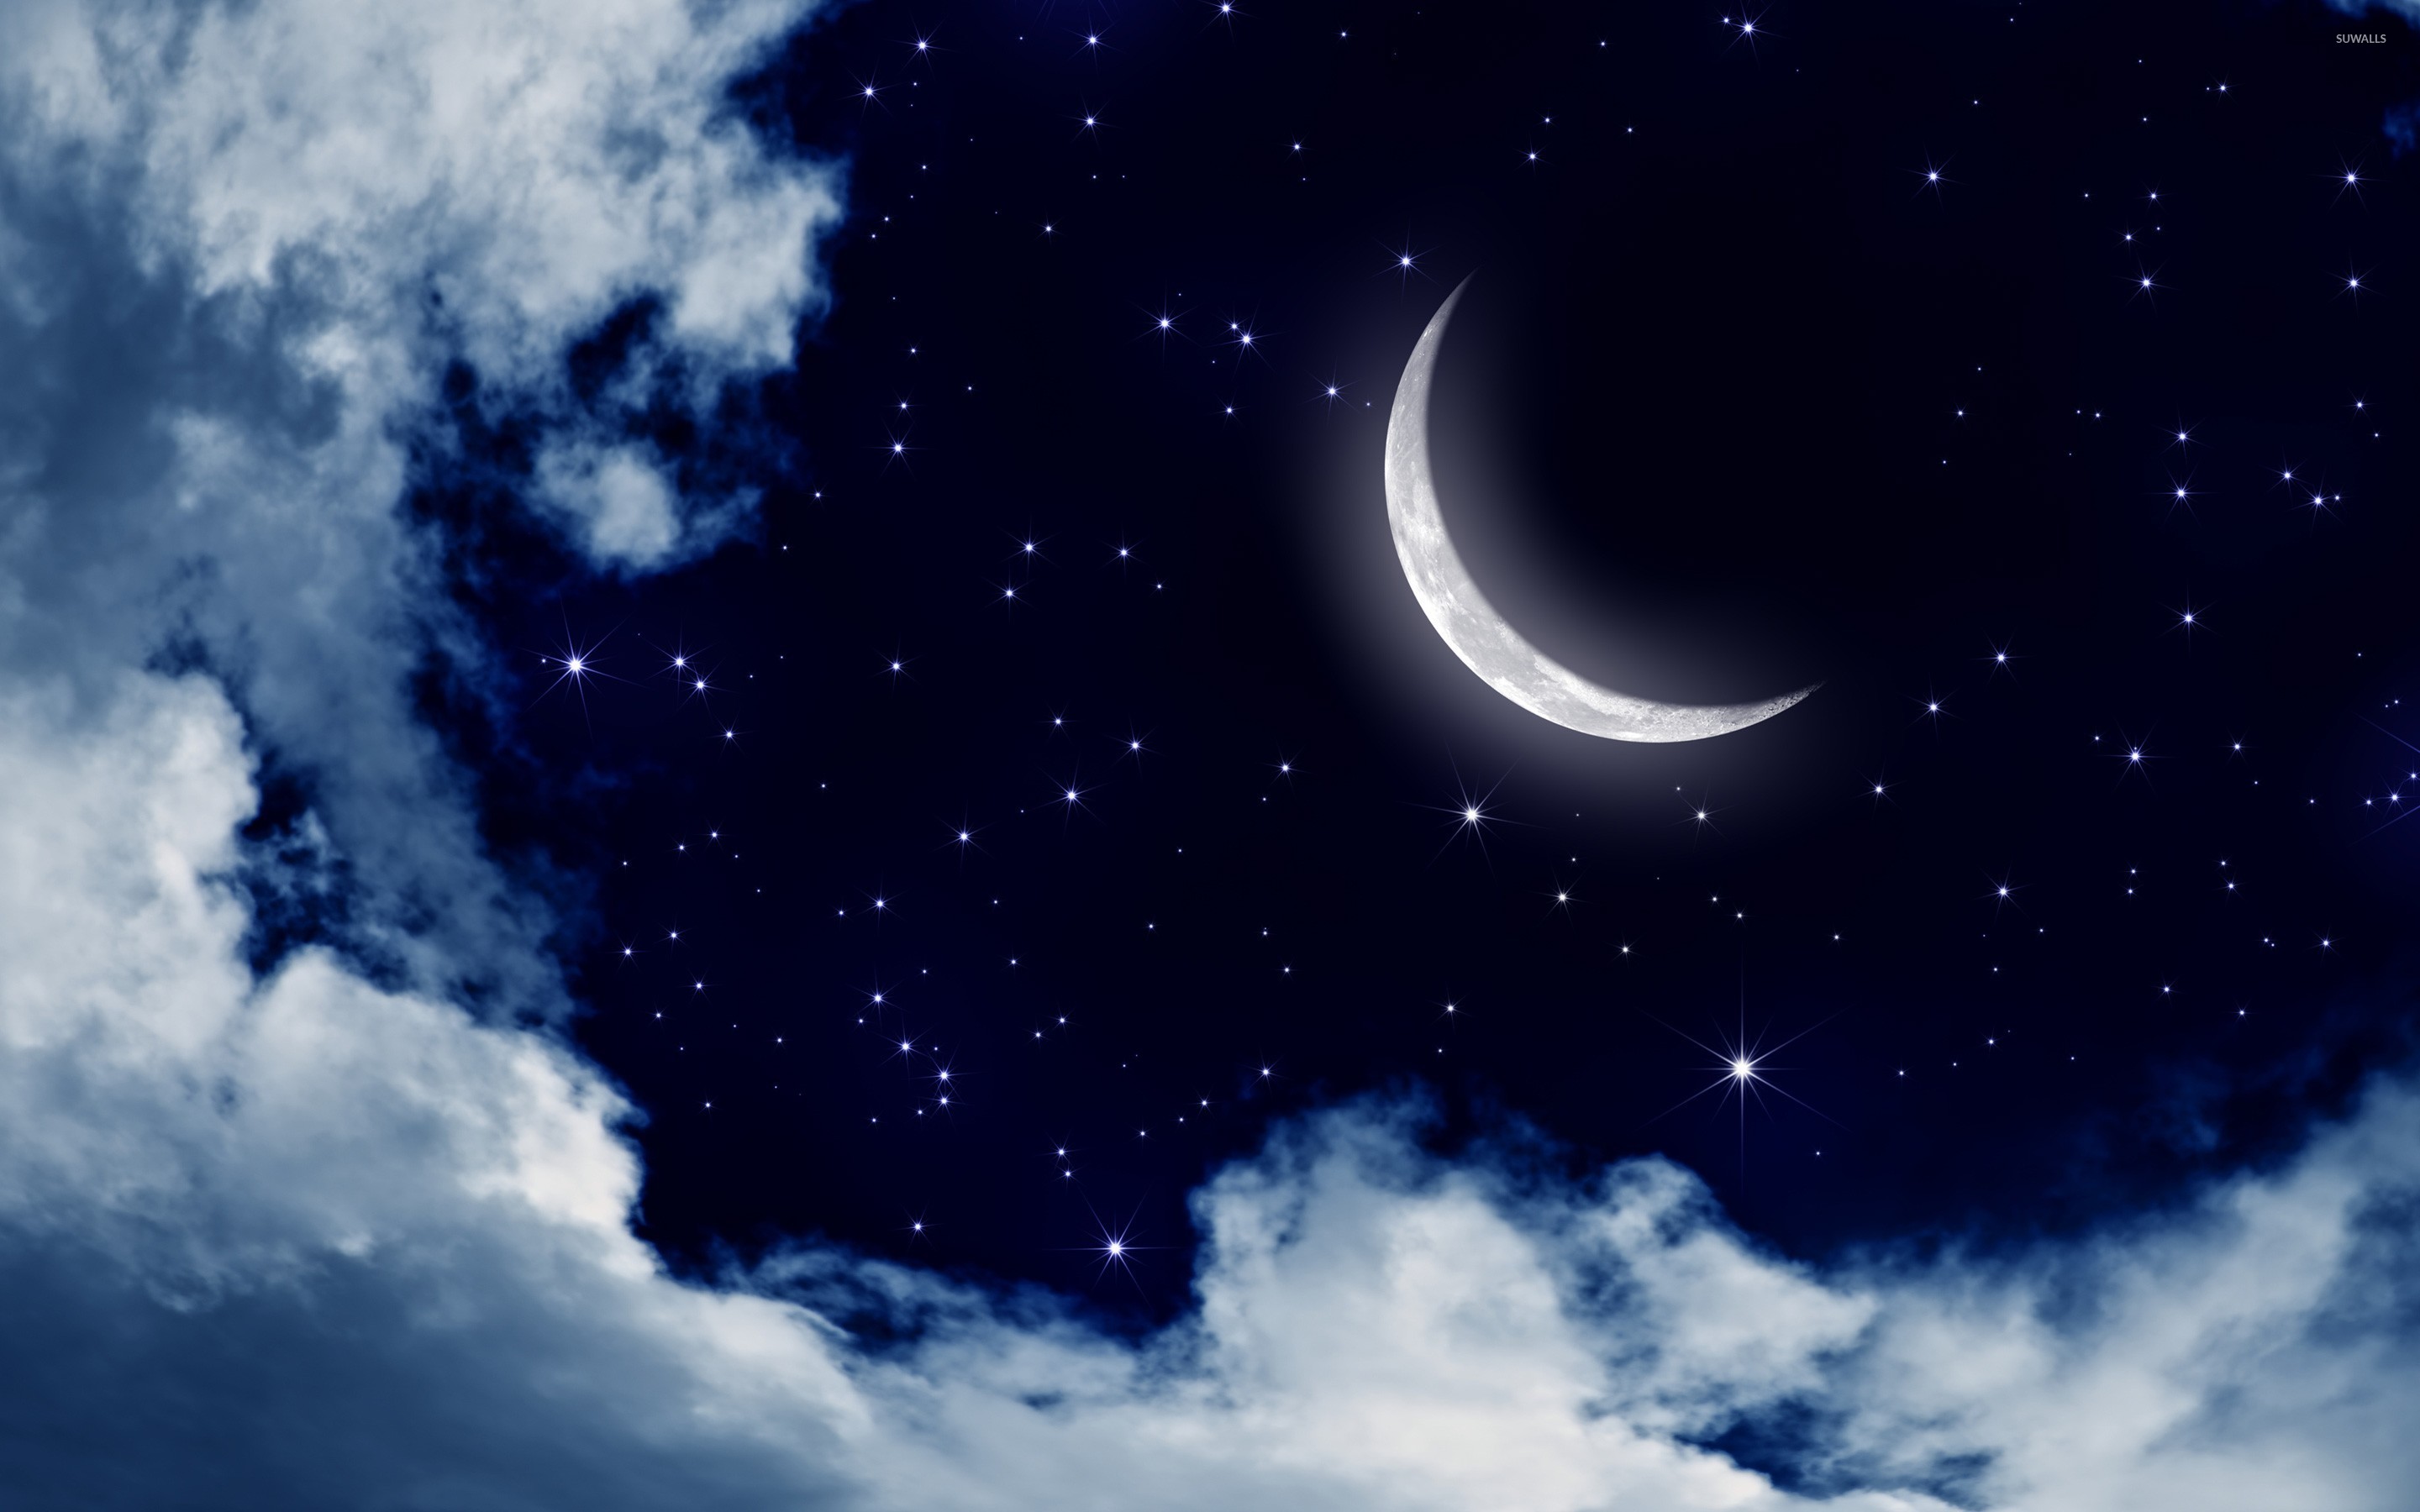 Moon and stars in the sky wallpaper   Digital Art wallpapers   25176